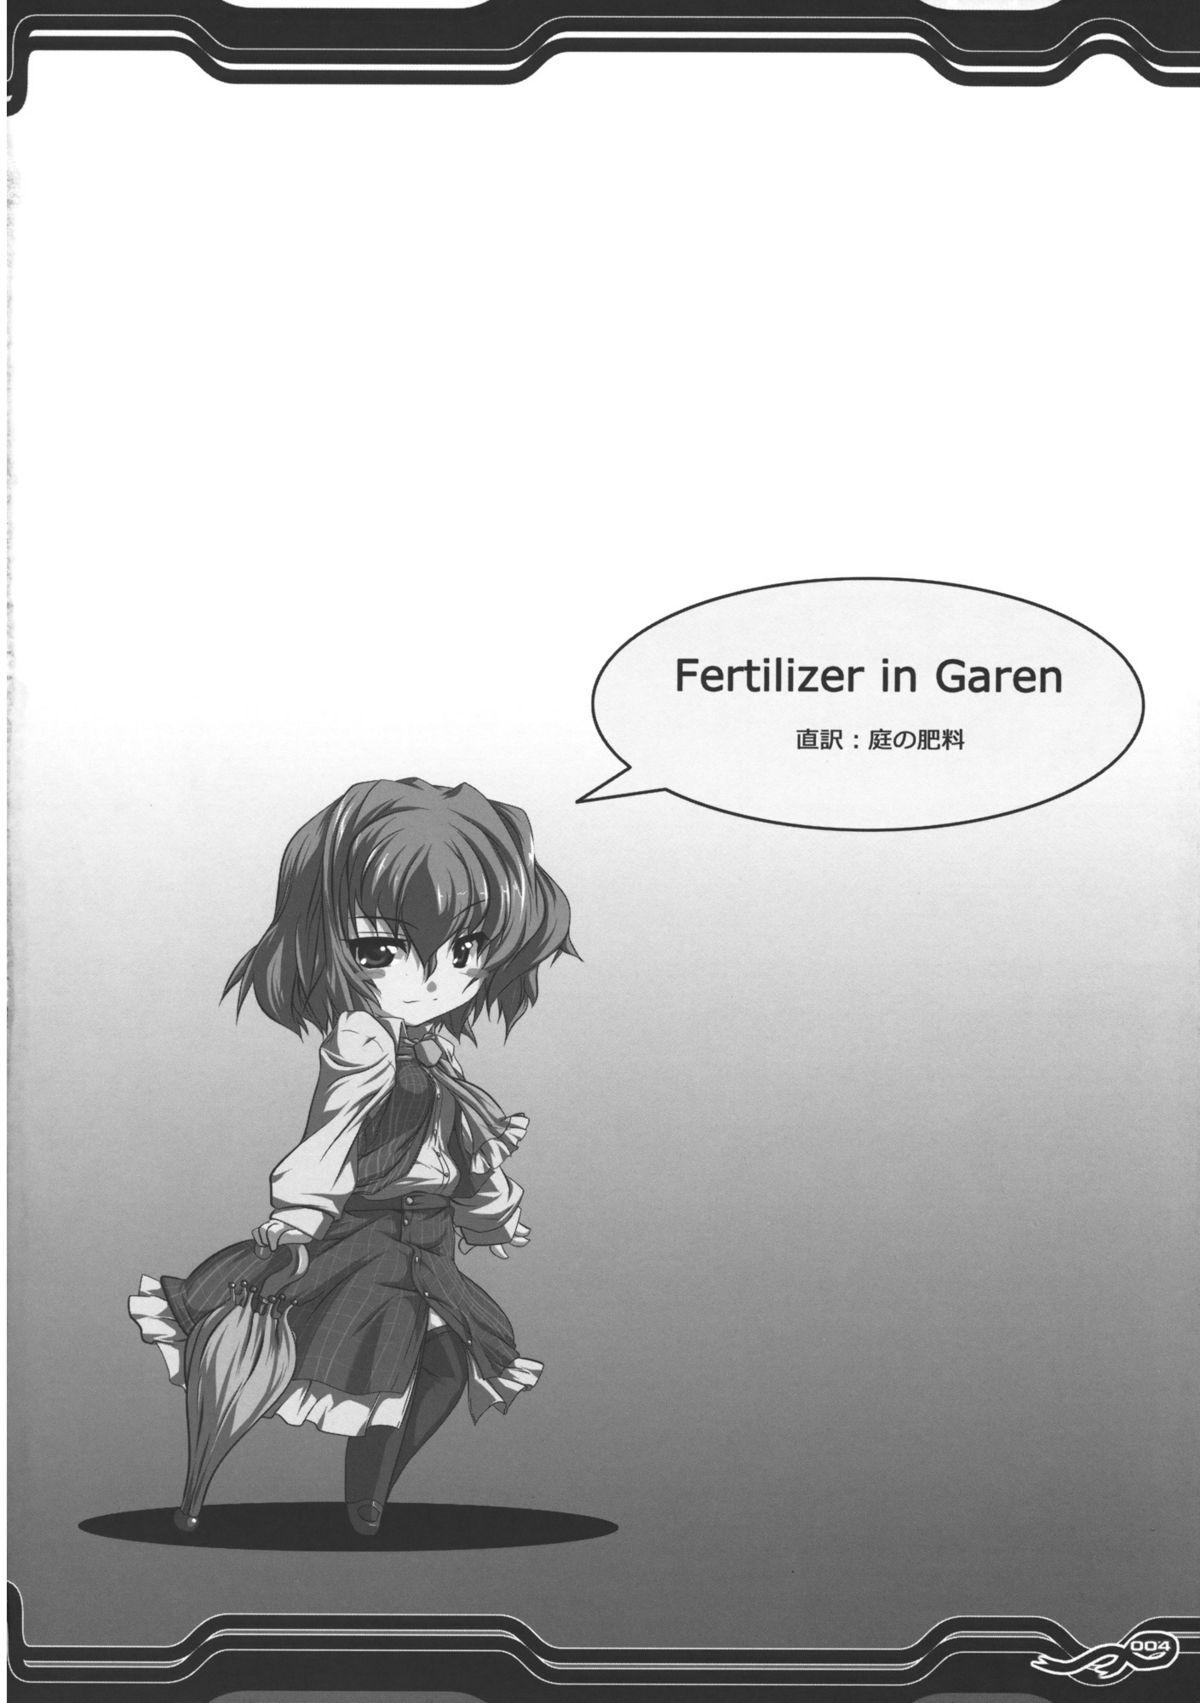 Celebrity FERTILIZER IN GARDEN - Touhou project Glasses - Picture 3